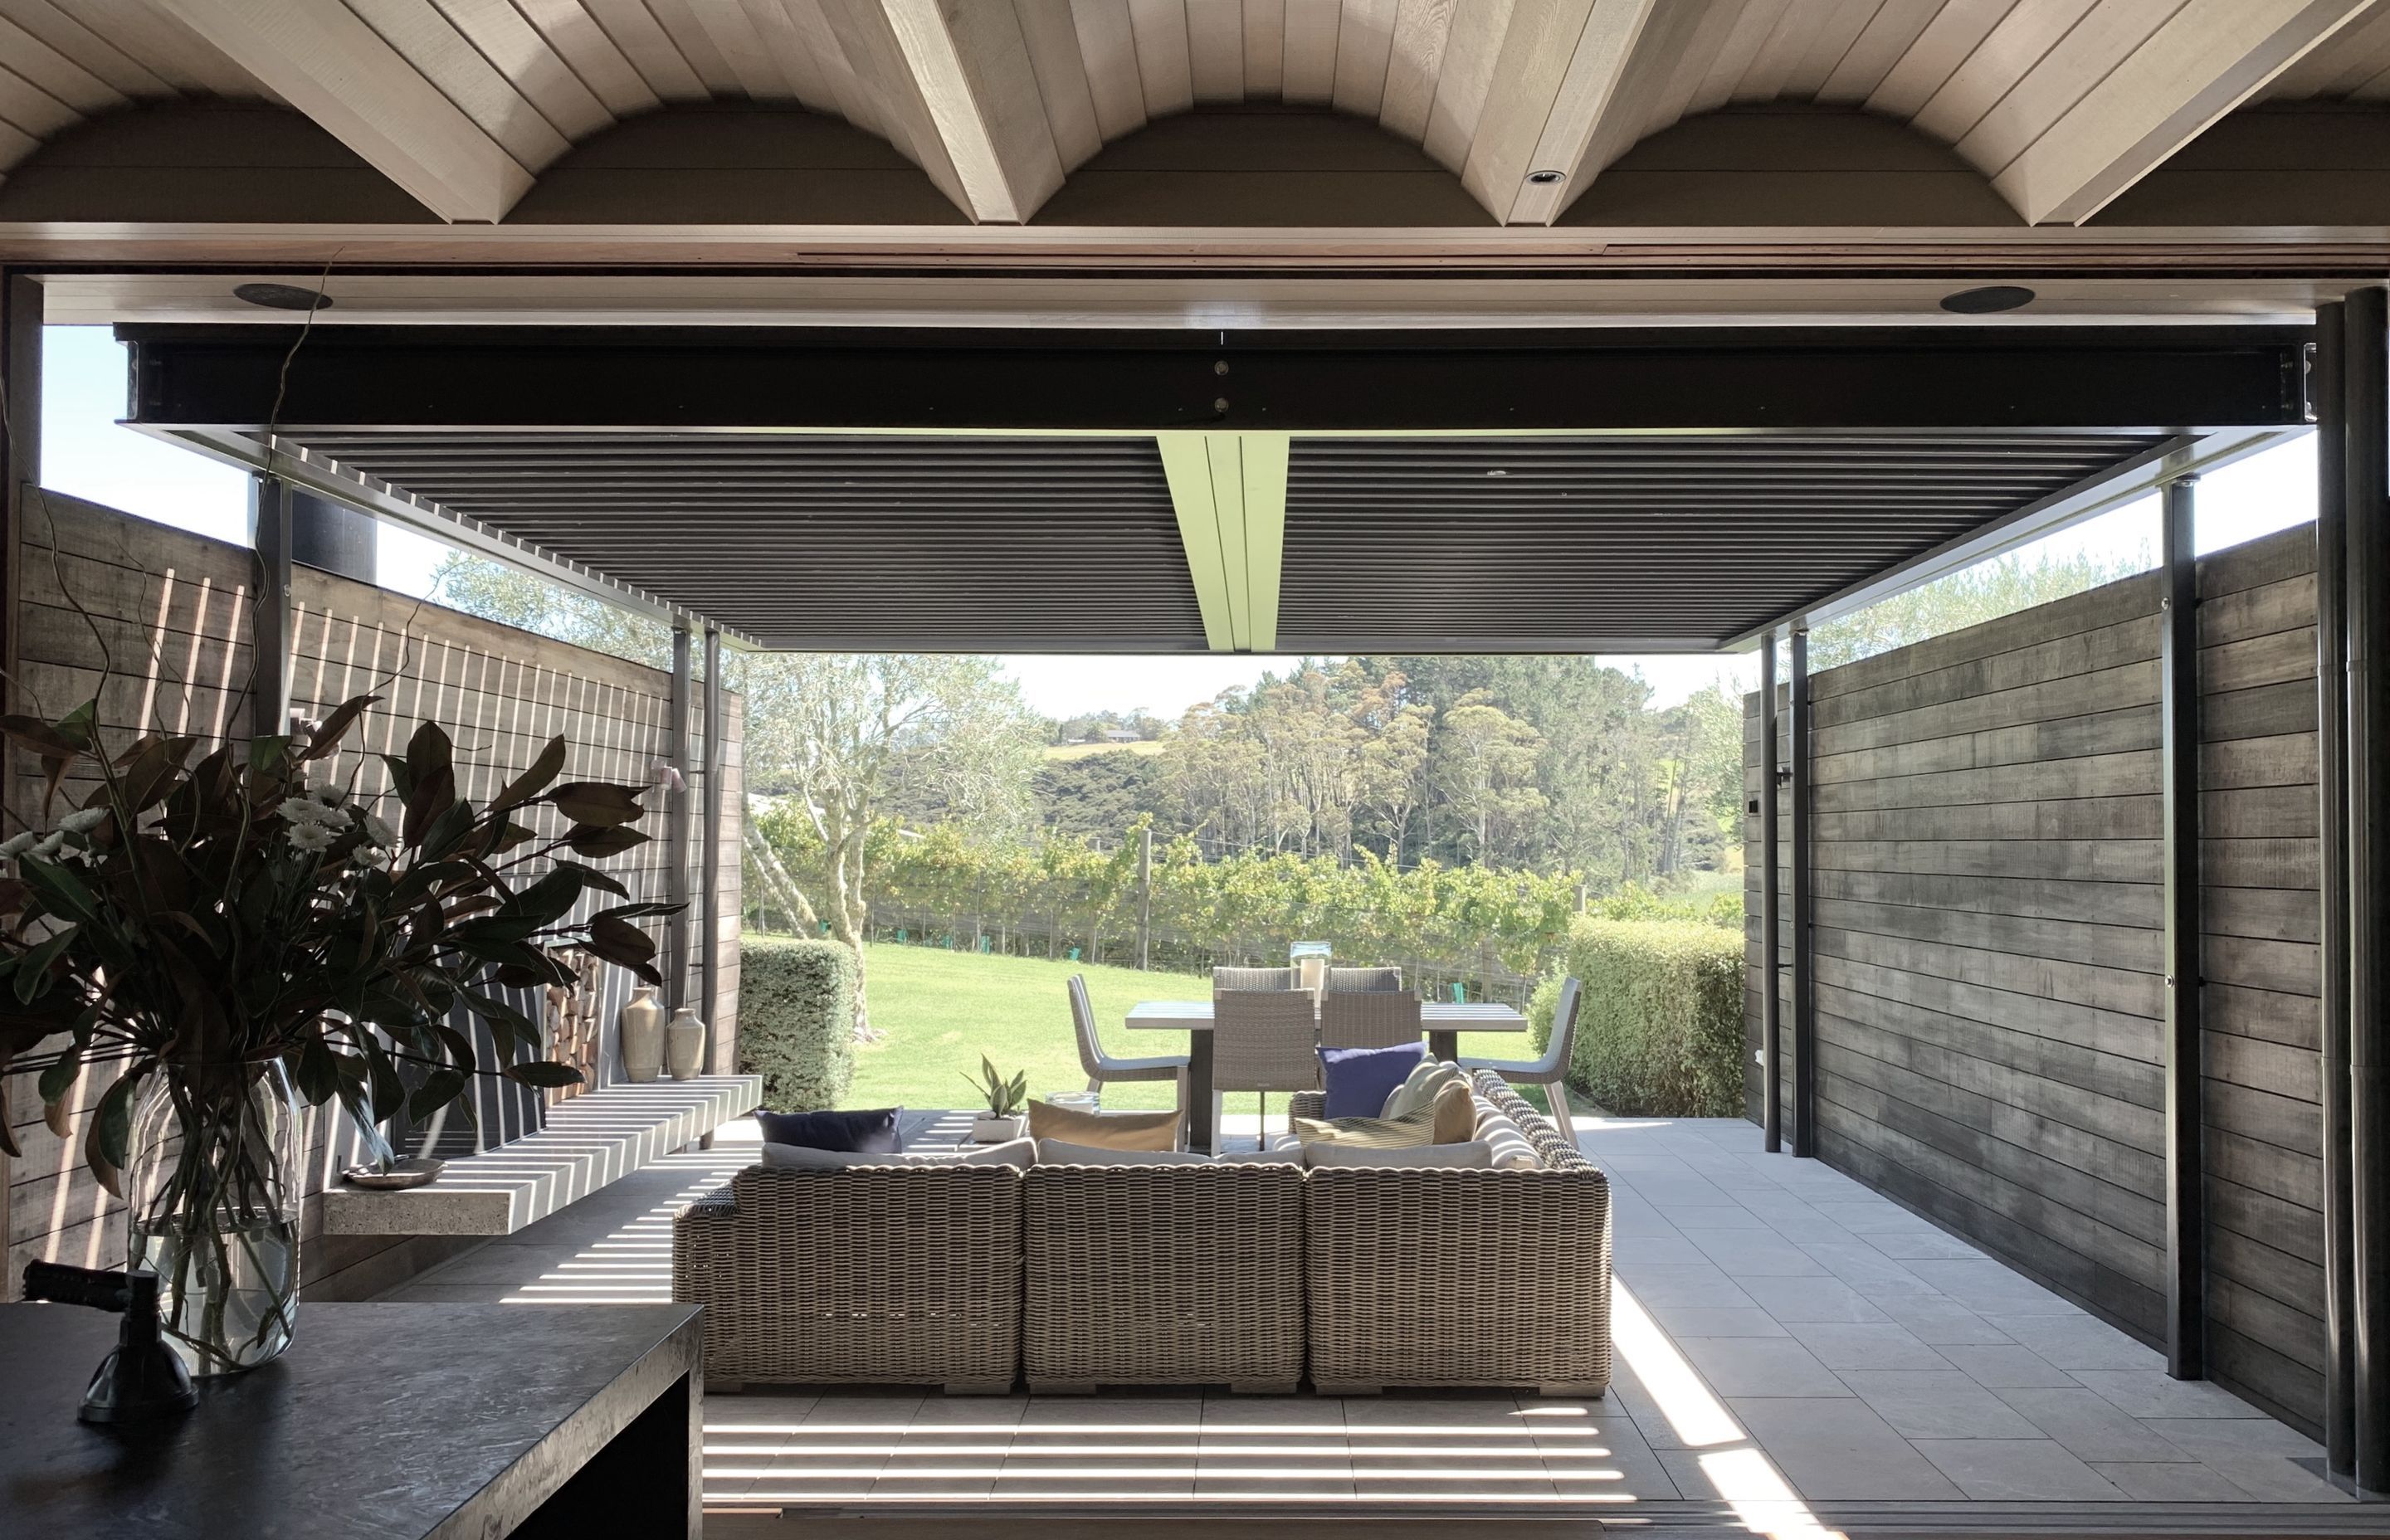 Louvered pergola with views to the vineyards beyond